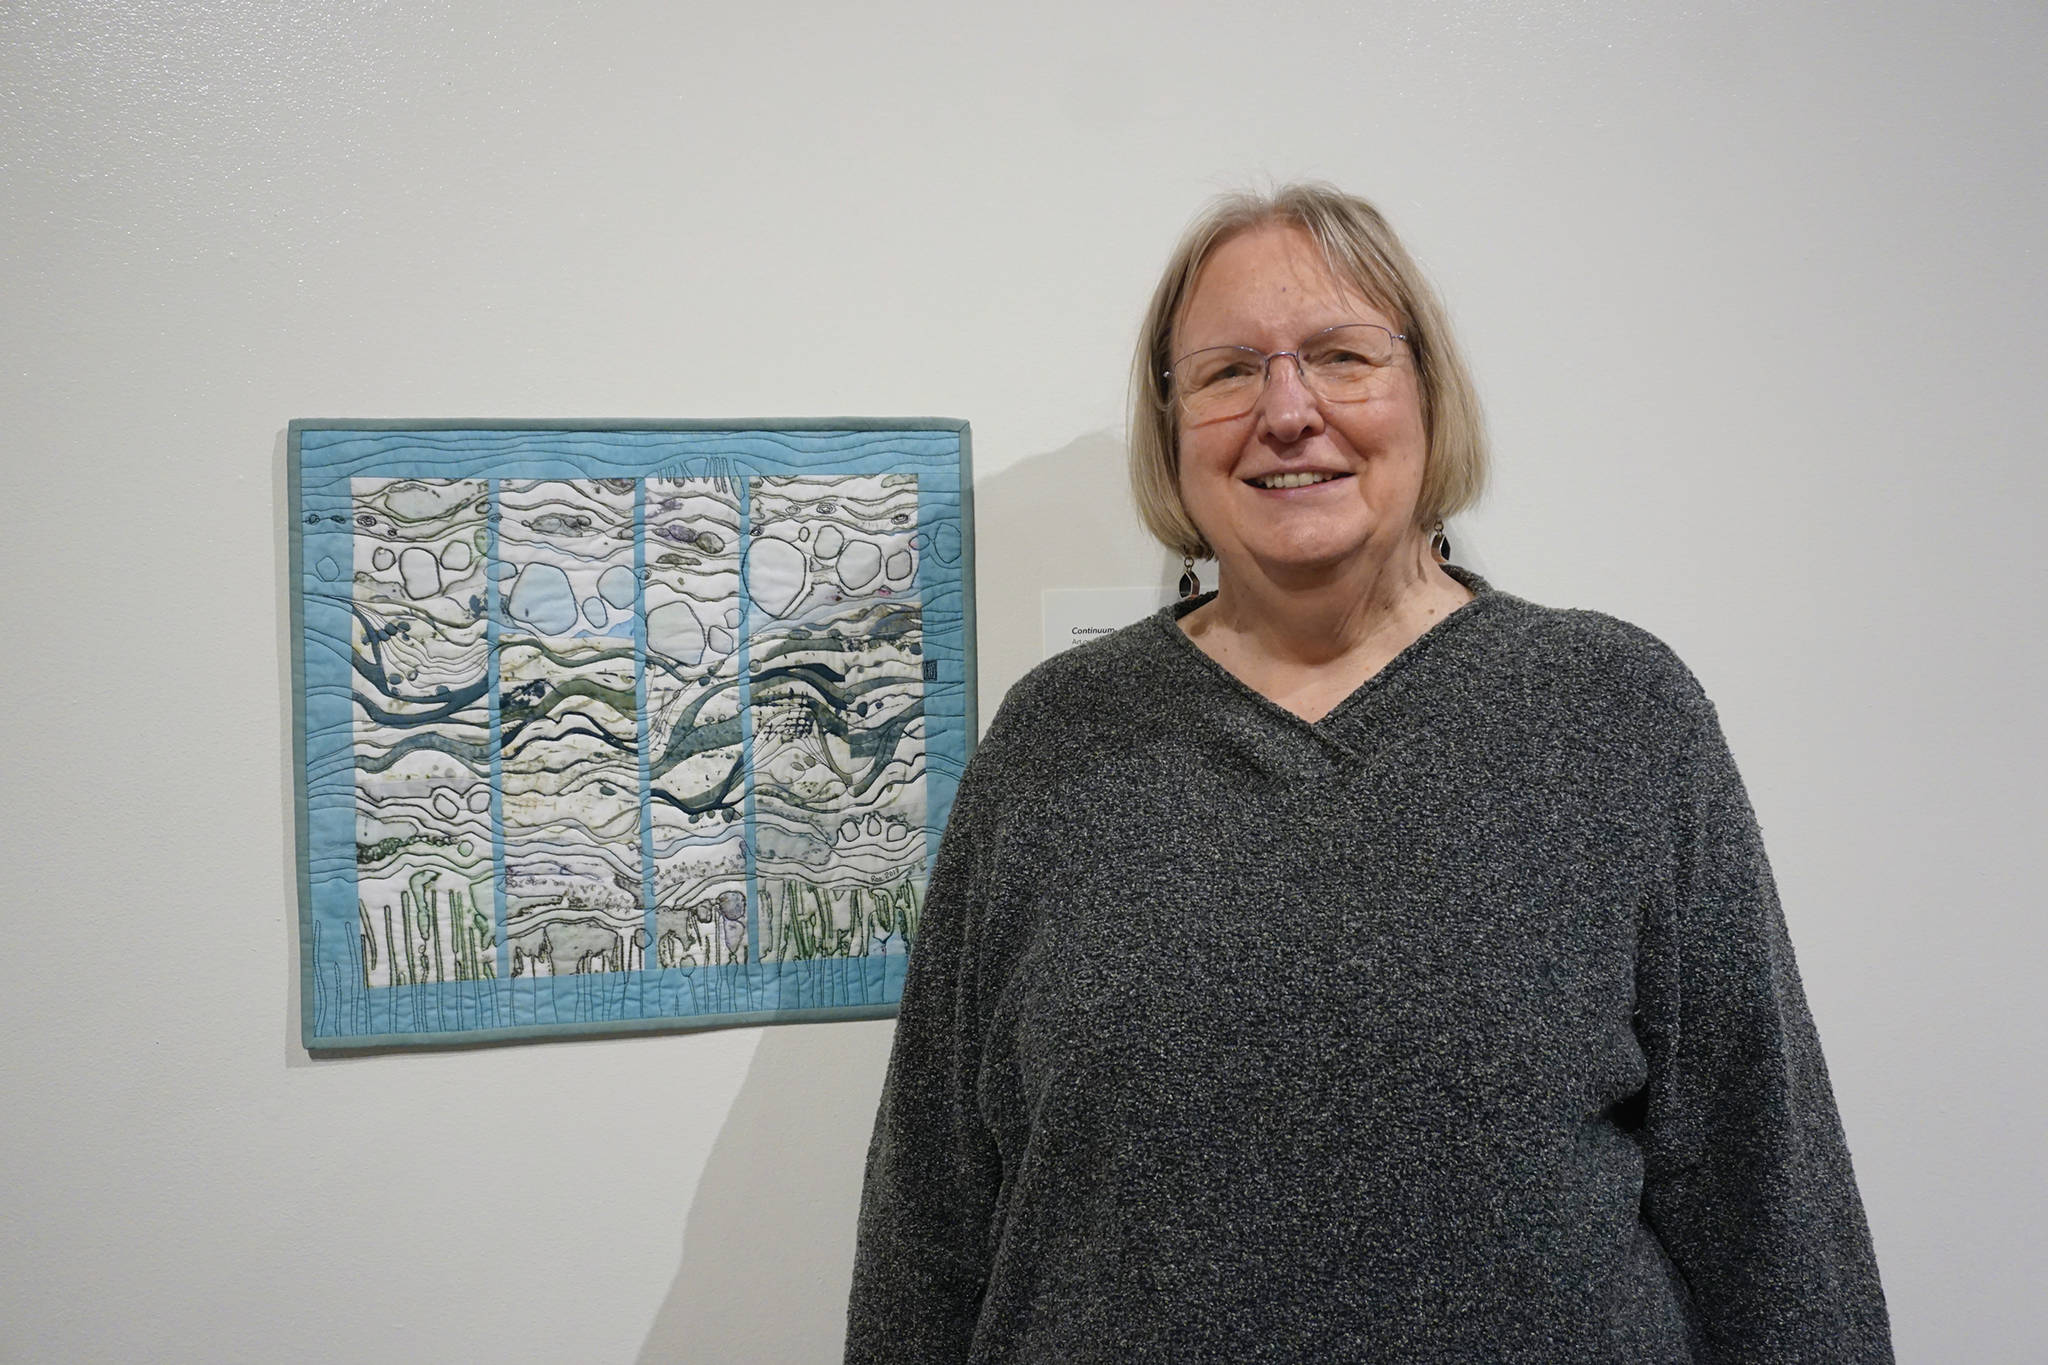 Ree Nancarrow stands next to her art quilt, “Continuum” on Feb. 4, 2020, at the Pratt Museum in Homer, Alaska. It was created in response to composer Libby Meyer’s “Turbulence.” Her work is part of “Denali Artists Respond to Music Inspired by Wilderness,” a collaboration between artists and composers showing Feb. 7-May 25, 2020, at the Pratt. (Photo by Michael Armstrong/Homer News)